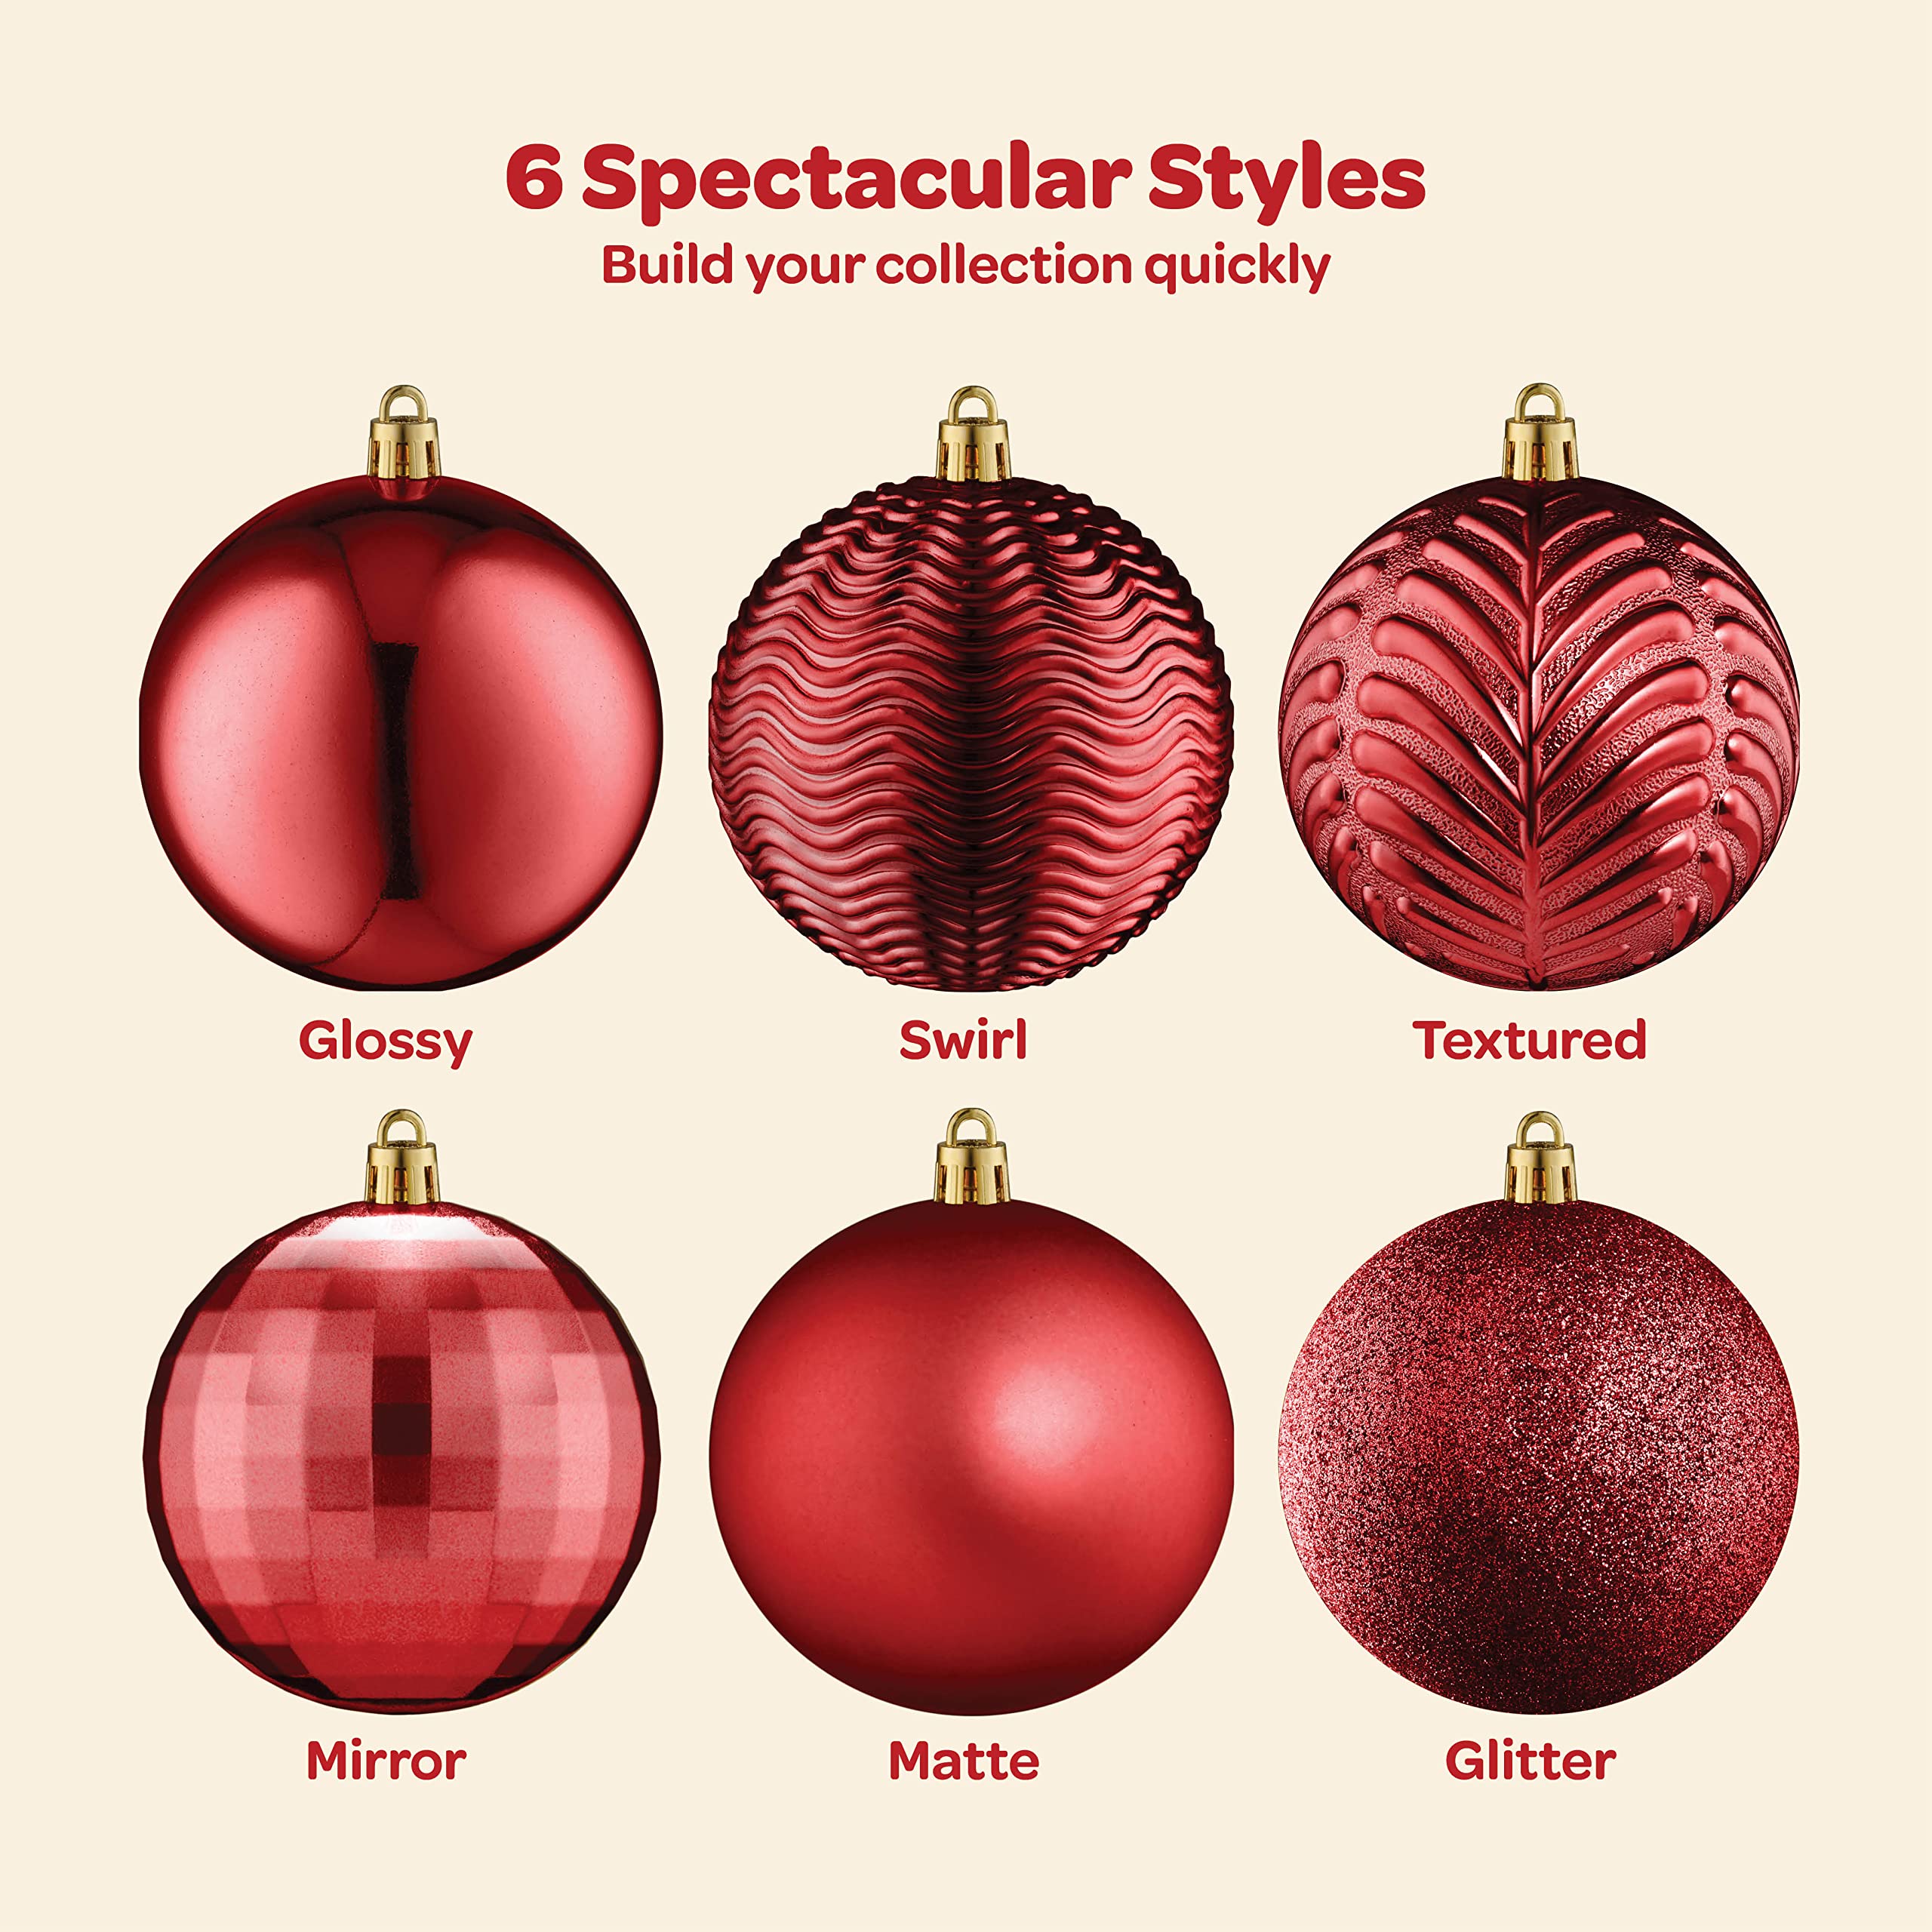 Christmas Ornaments Set of 36 - Beautiful [Wine-Red] Christmas Tree Decorations Ornaments Set - 6 Style Christmas Ball Ornaments - Shatterproof/Pre-Strung - for Holiday/Party/Decorations/DIY  - Like New